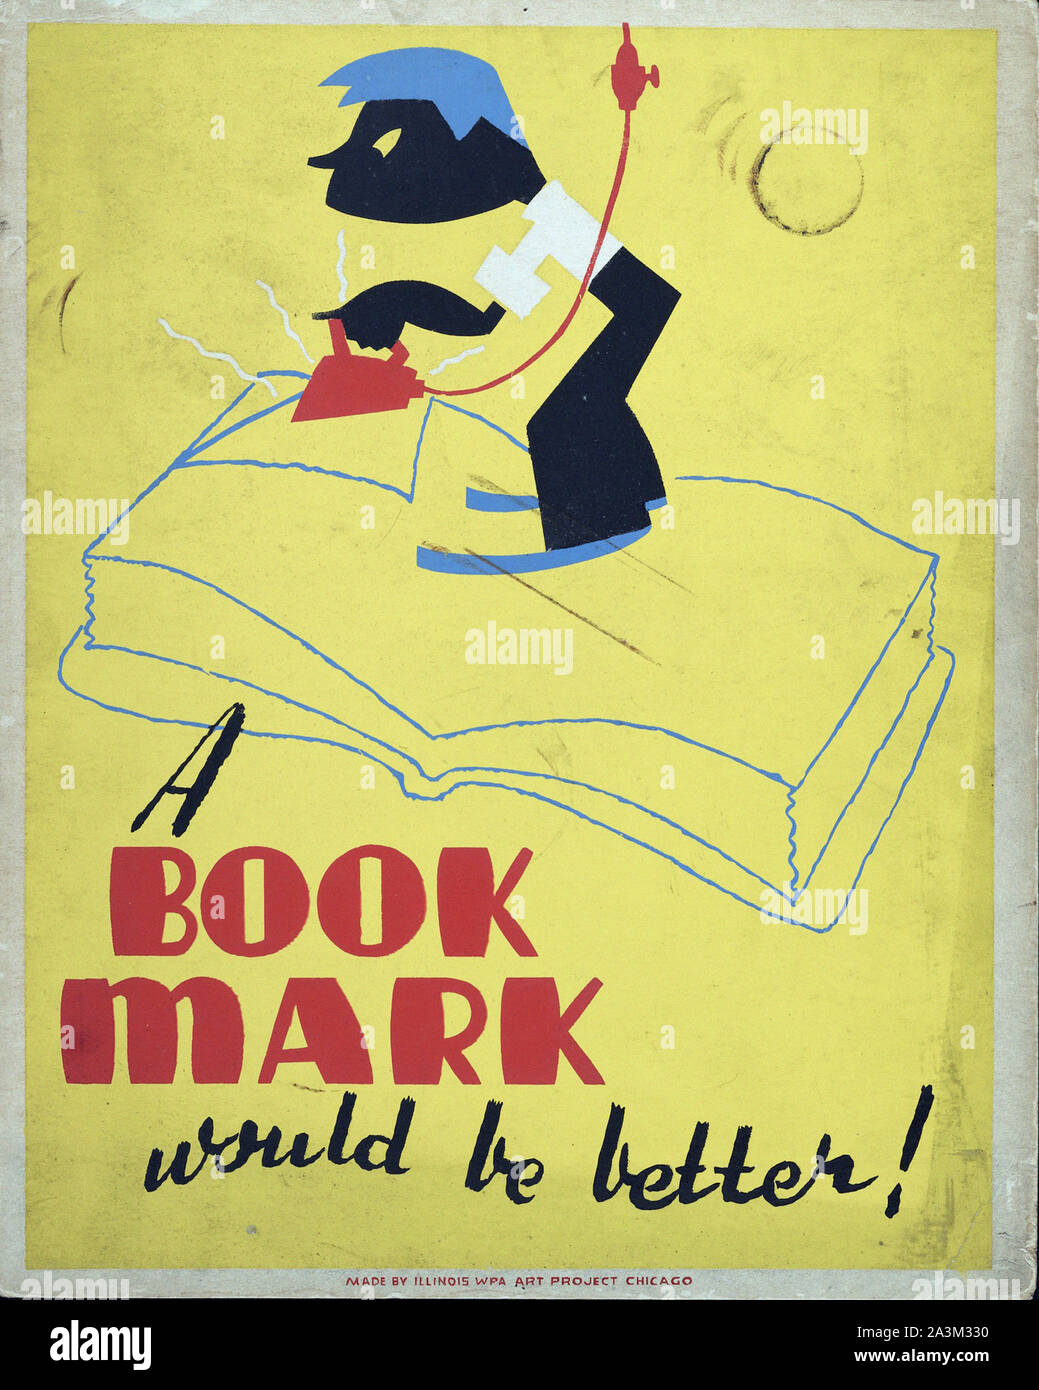 A Book Mark Would Be Better ! -  Work Progress Administration - Federal Art Project -  Vintage poster Stock Photo